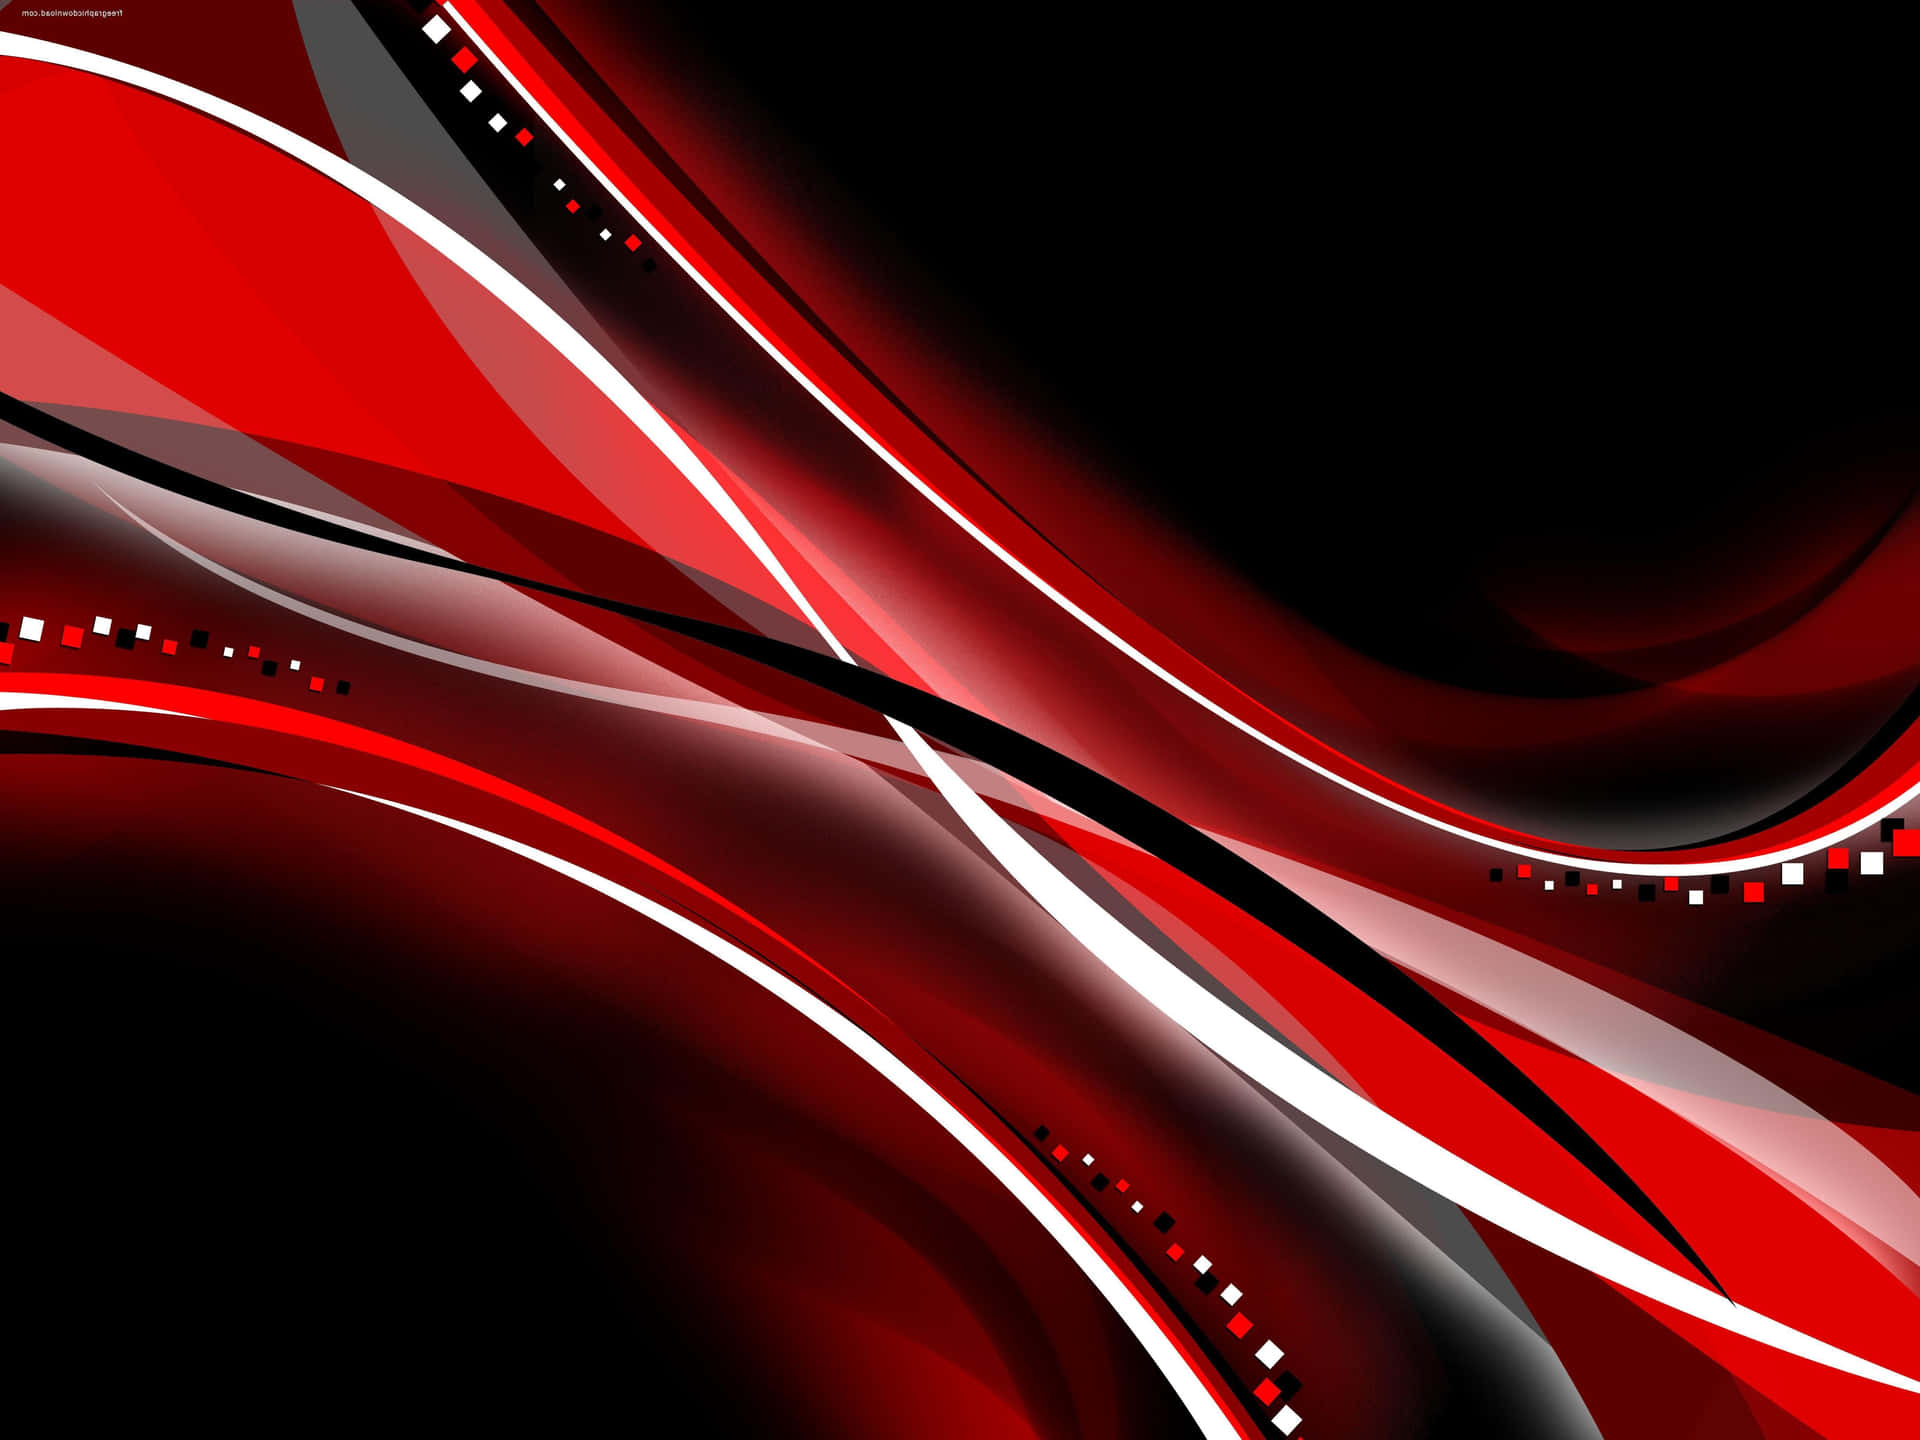 Vibrant Red, Black and White Geometric Pattern Background